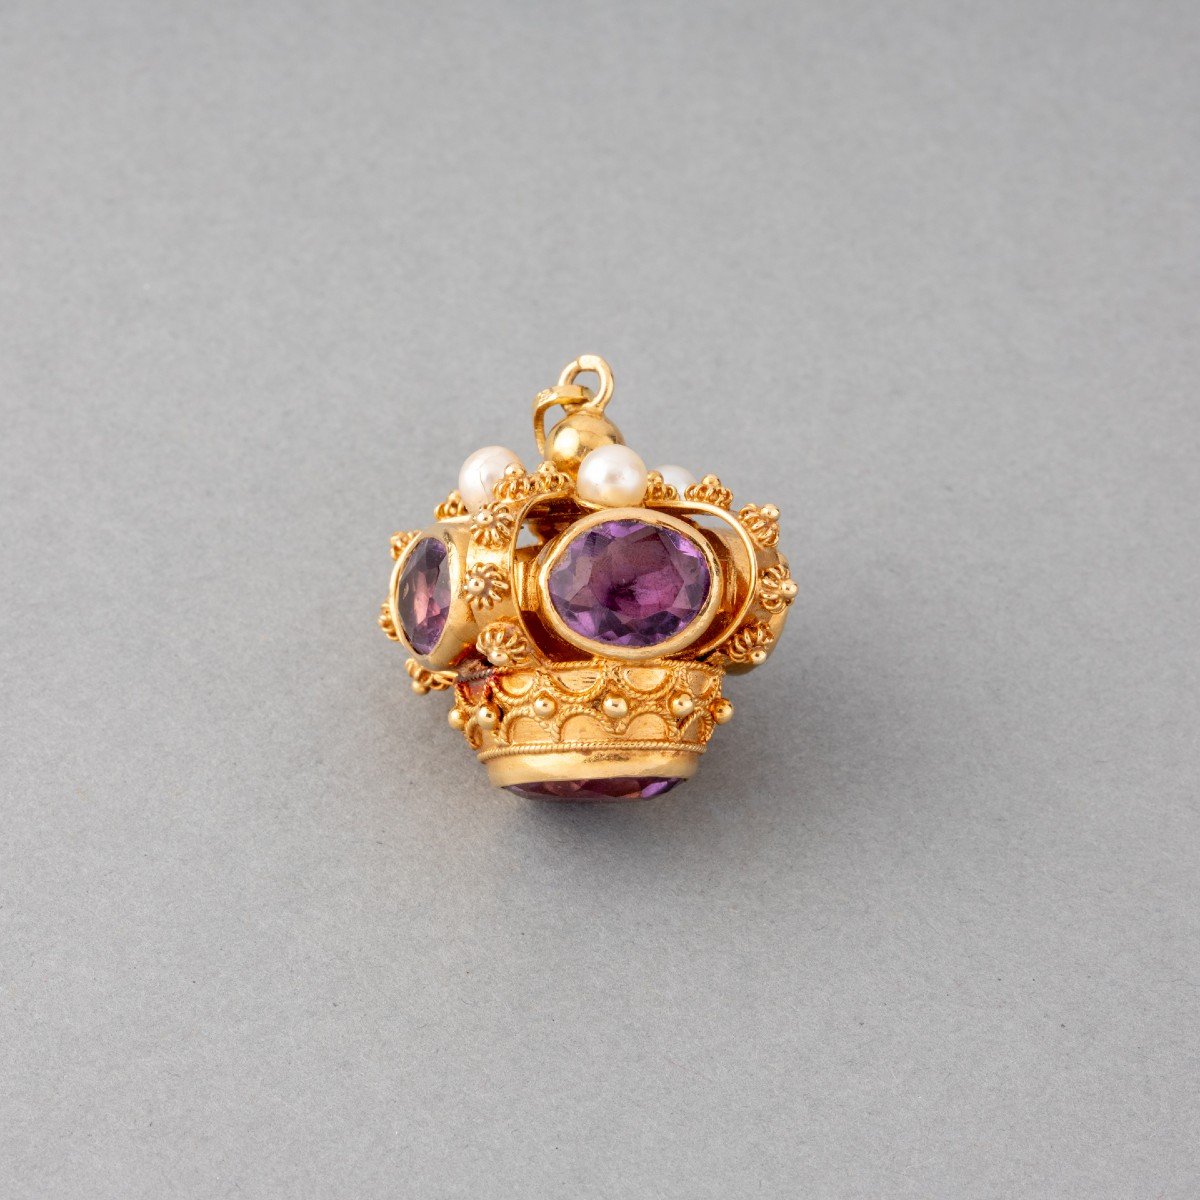 Vintage Italian Charm Pendant In Gold And Amethysts-photo-2